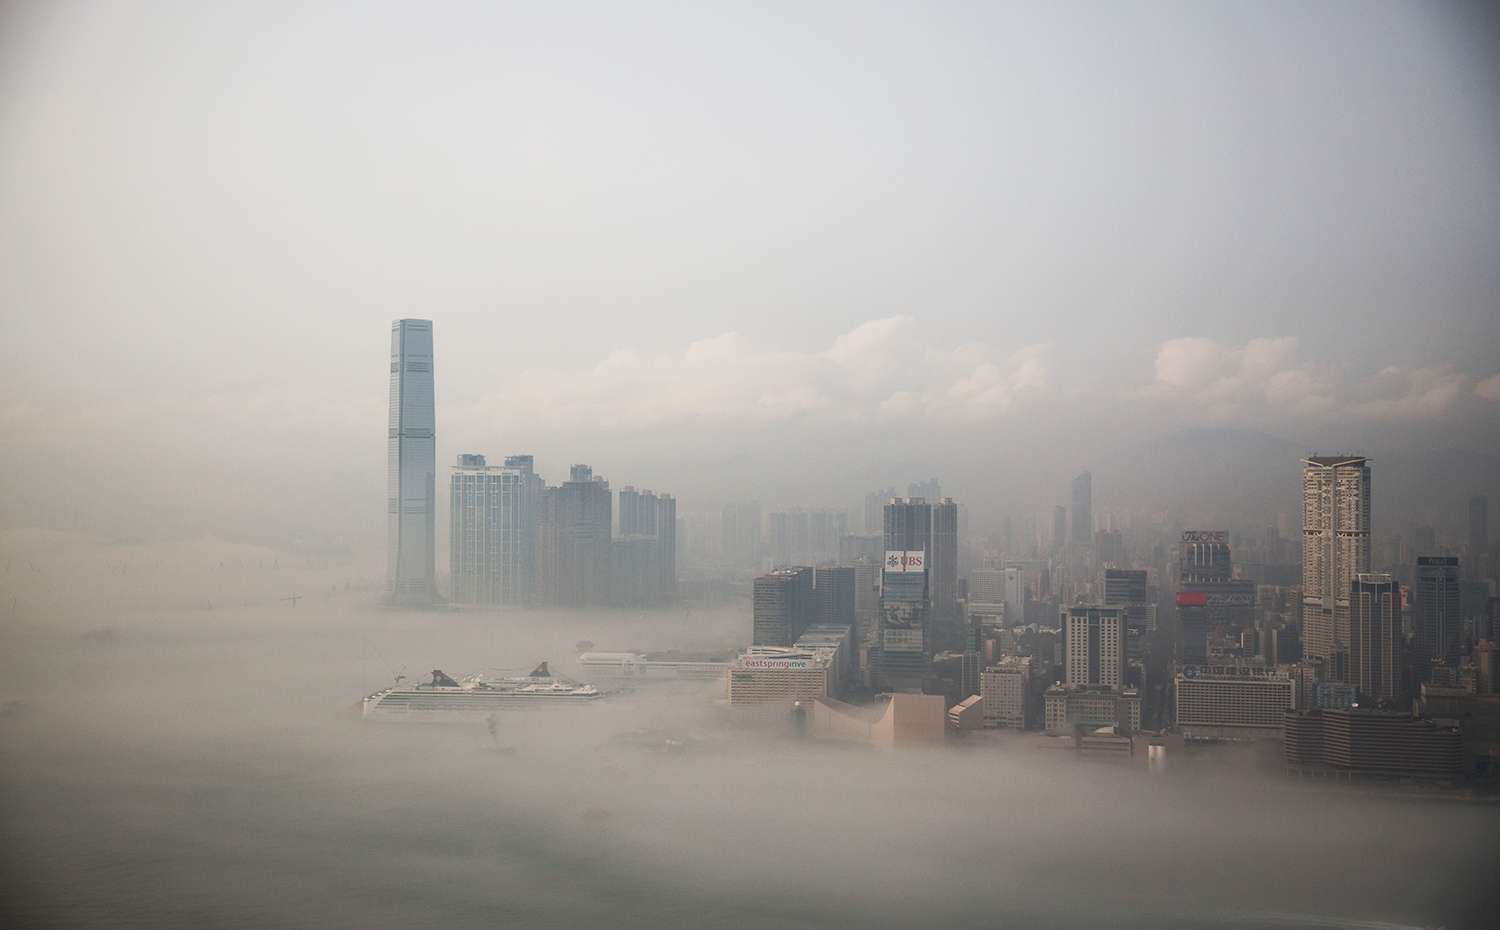 The cold, humid weather will continue, and the situation will last for a couple of a days at least into April,” said the chief experimental officer at Hong Kong Observatory. Photo: AFP